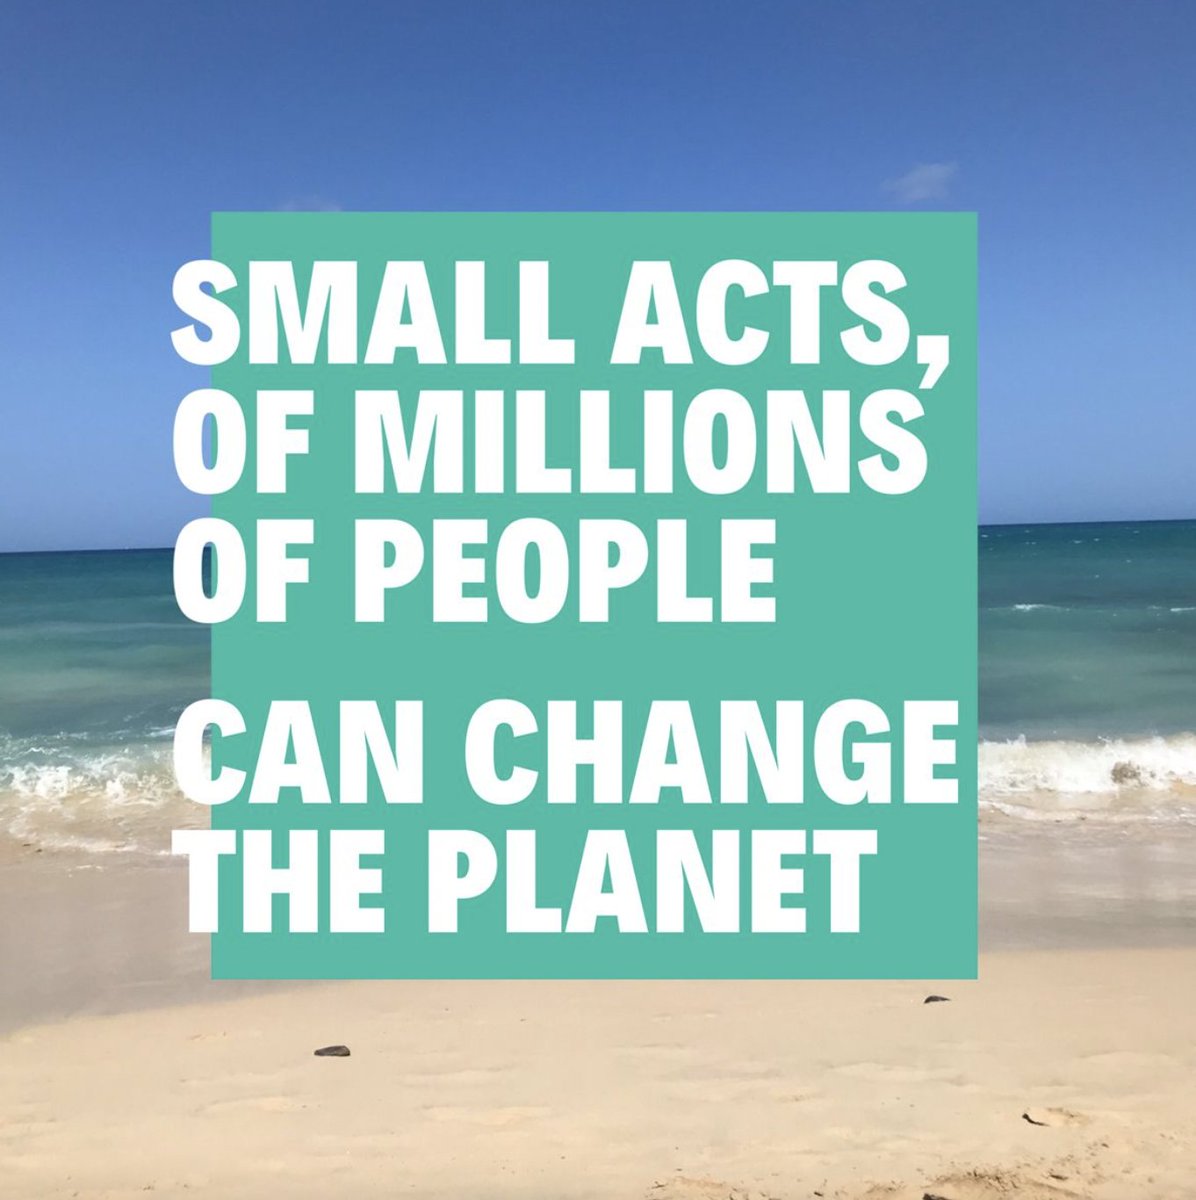 🌊 Small acts, big waves! 🌟 
When a million people make eco-friendly choices every day, we create a tidal wave of positive change for our oceans and planet. 🌎💙 
Together, we can make a world of difference. 🌊🐠 #SmallActsBigImpact #OceanHeroes